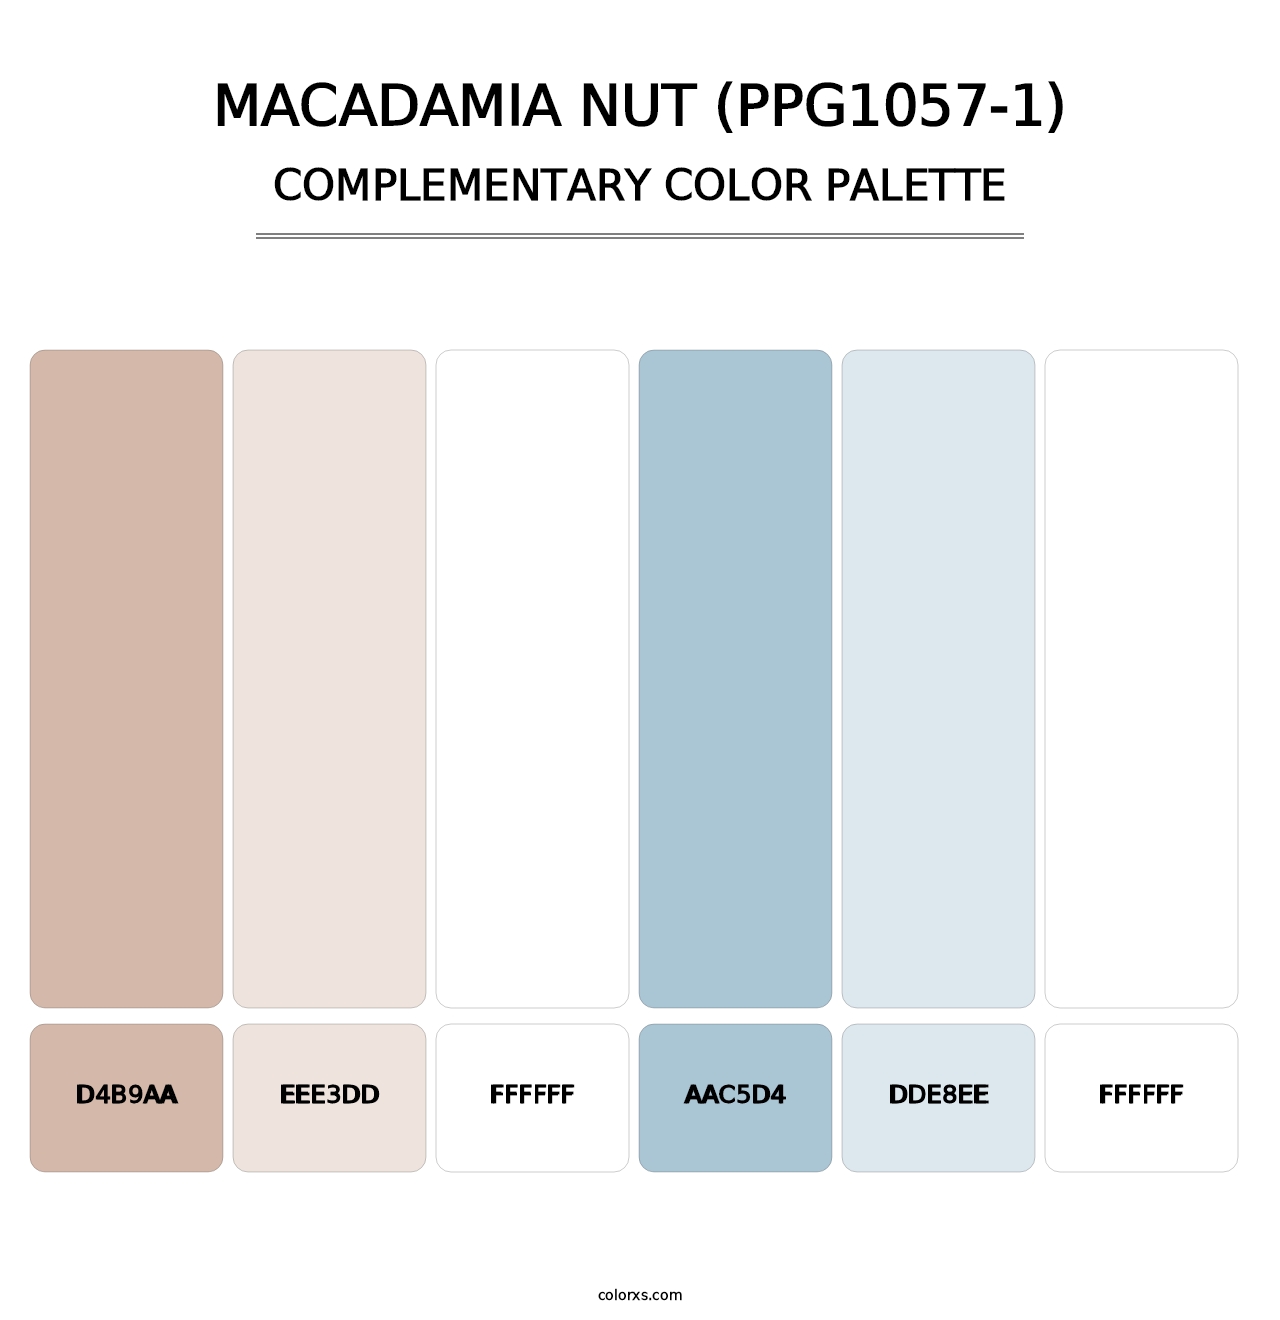 Macadamia Nut (PPG1057-1) - Complementary Color Palette